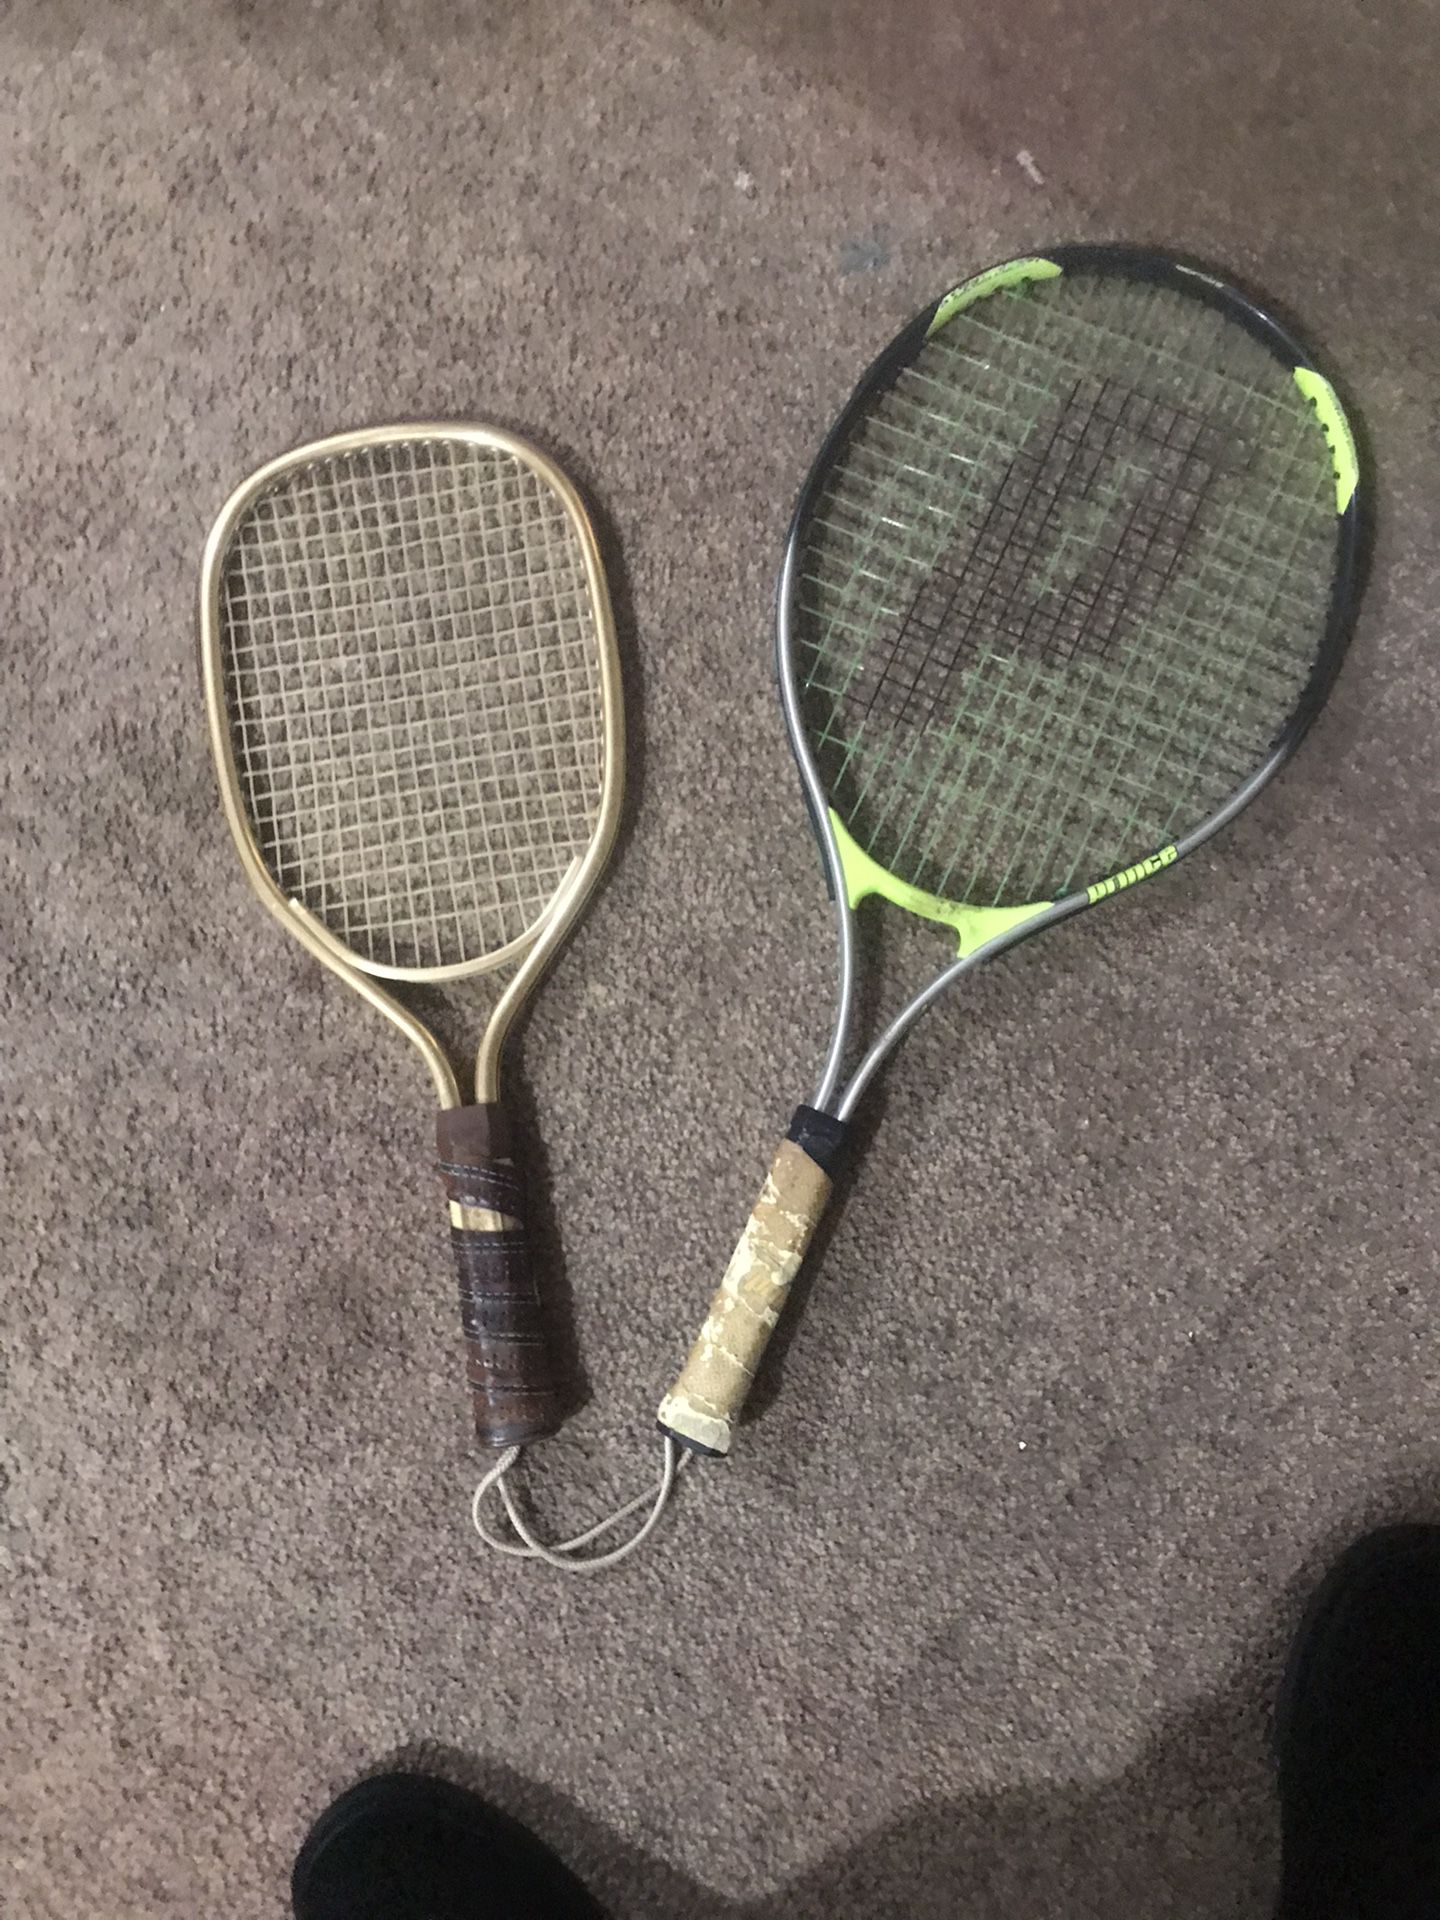 Tennis Rackets For Sale Take Both For 40